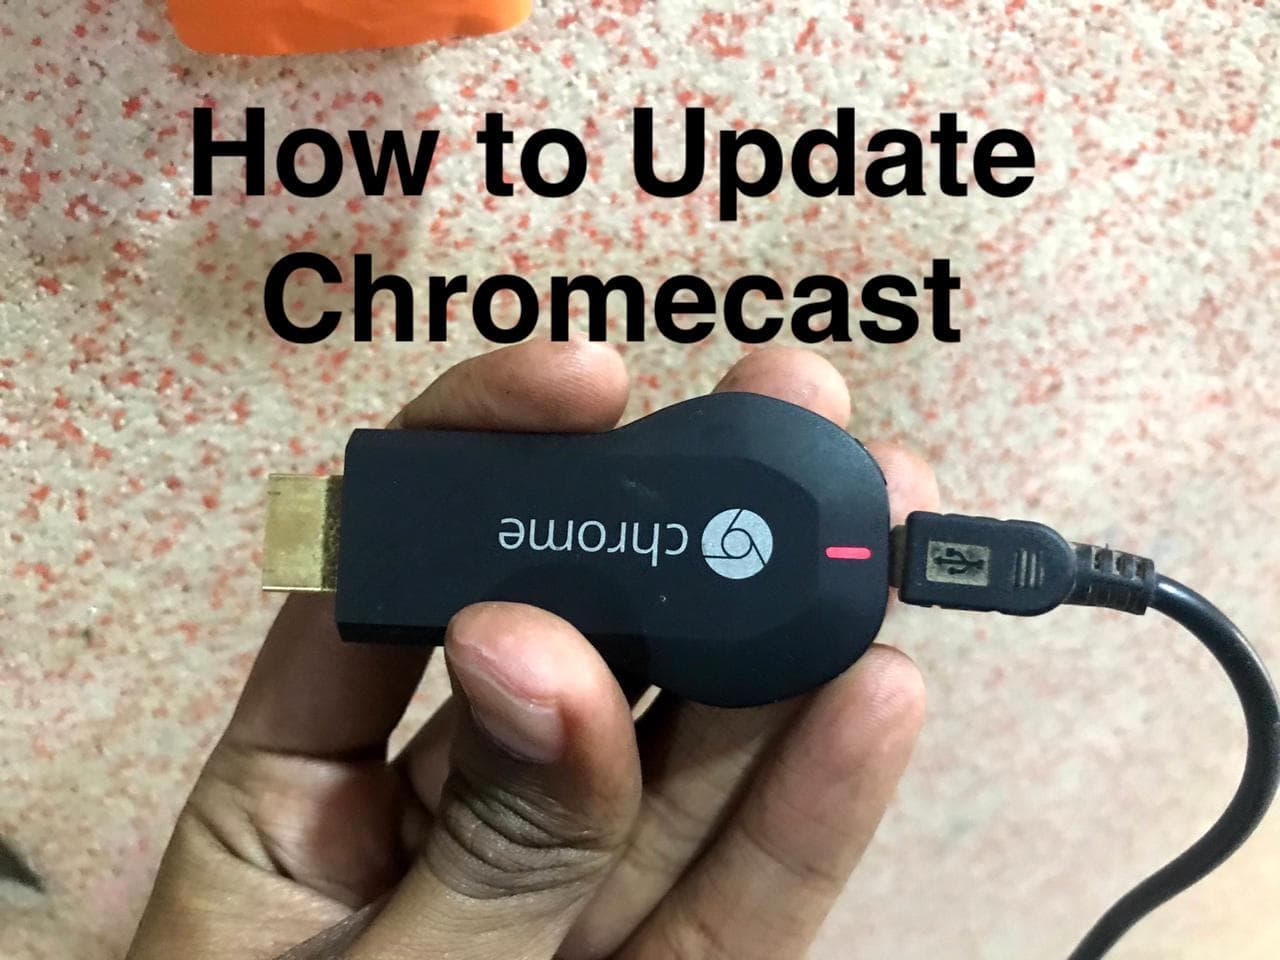 dannelse hvorfor kål How to Update Chromecast to the latest version - Do it the Easy Way!